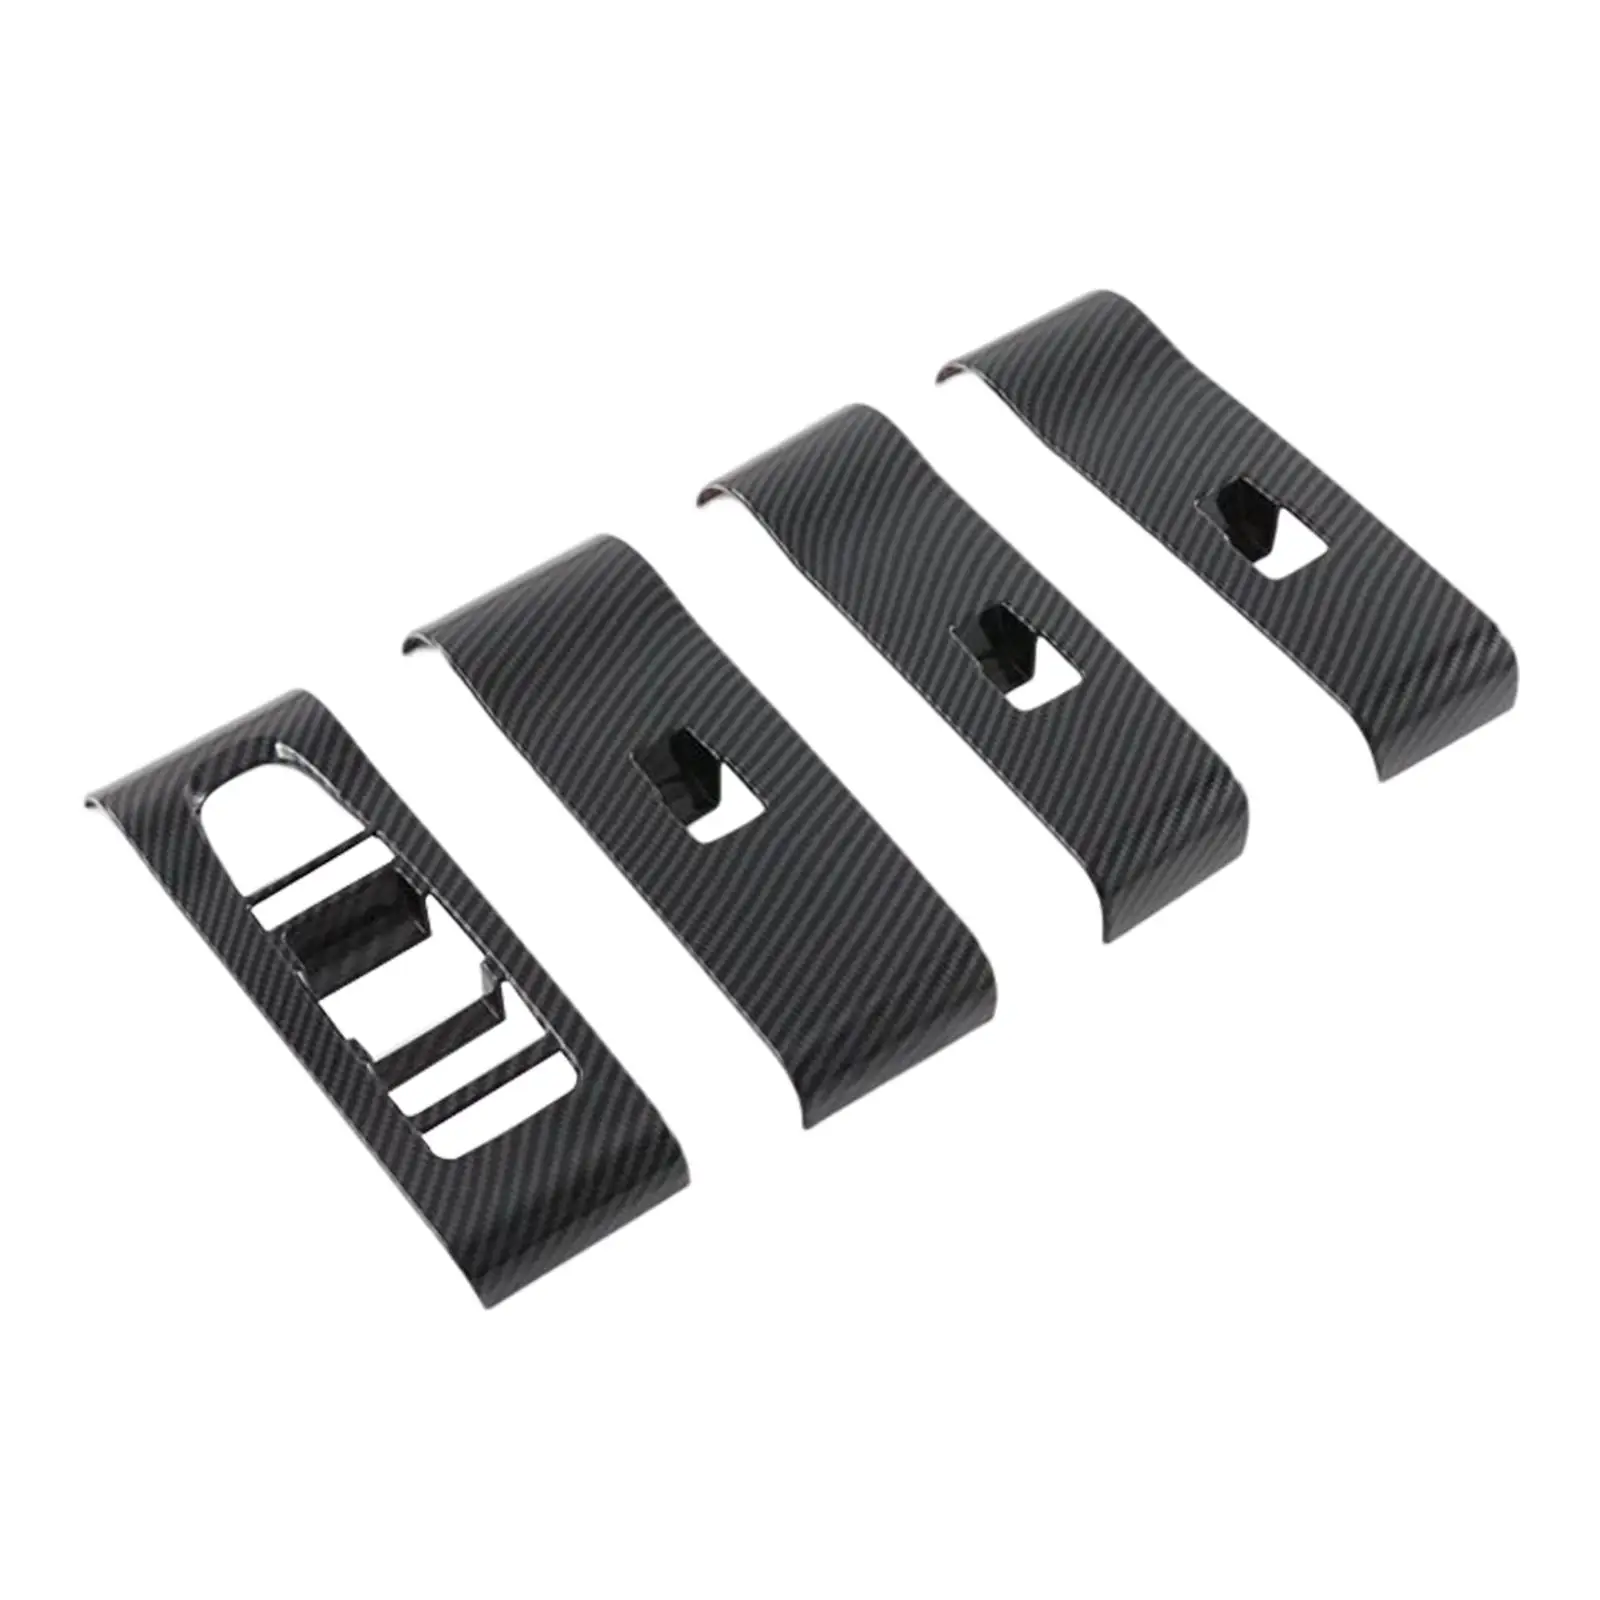 Auto Window Lift Switch Panel Cover Trim Carbon Fiber Parts for Byd Atto 3